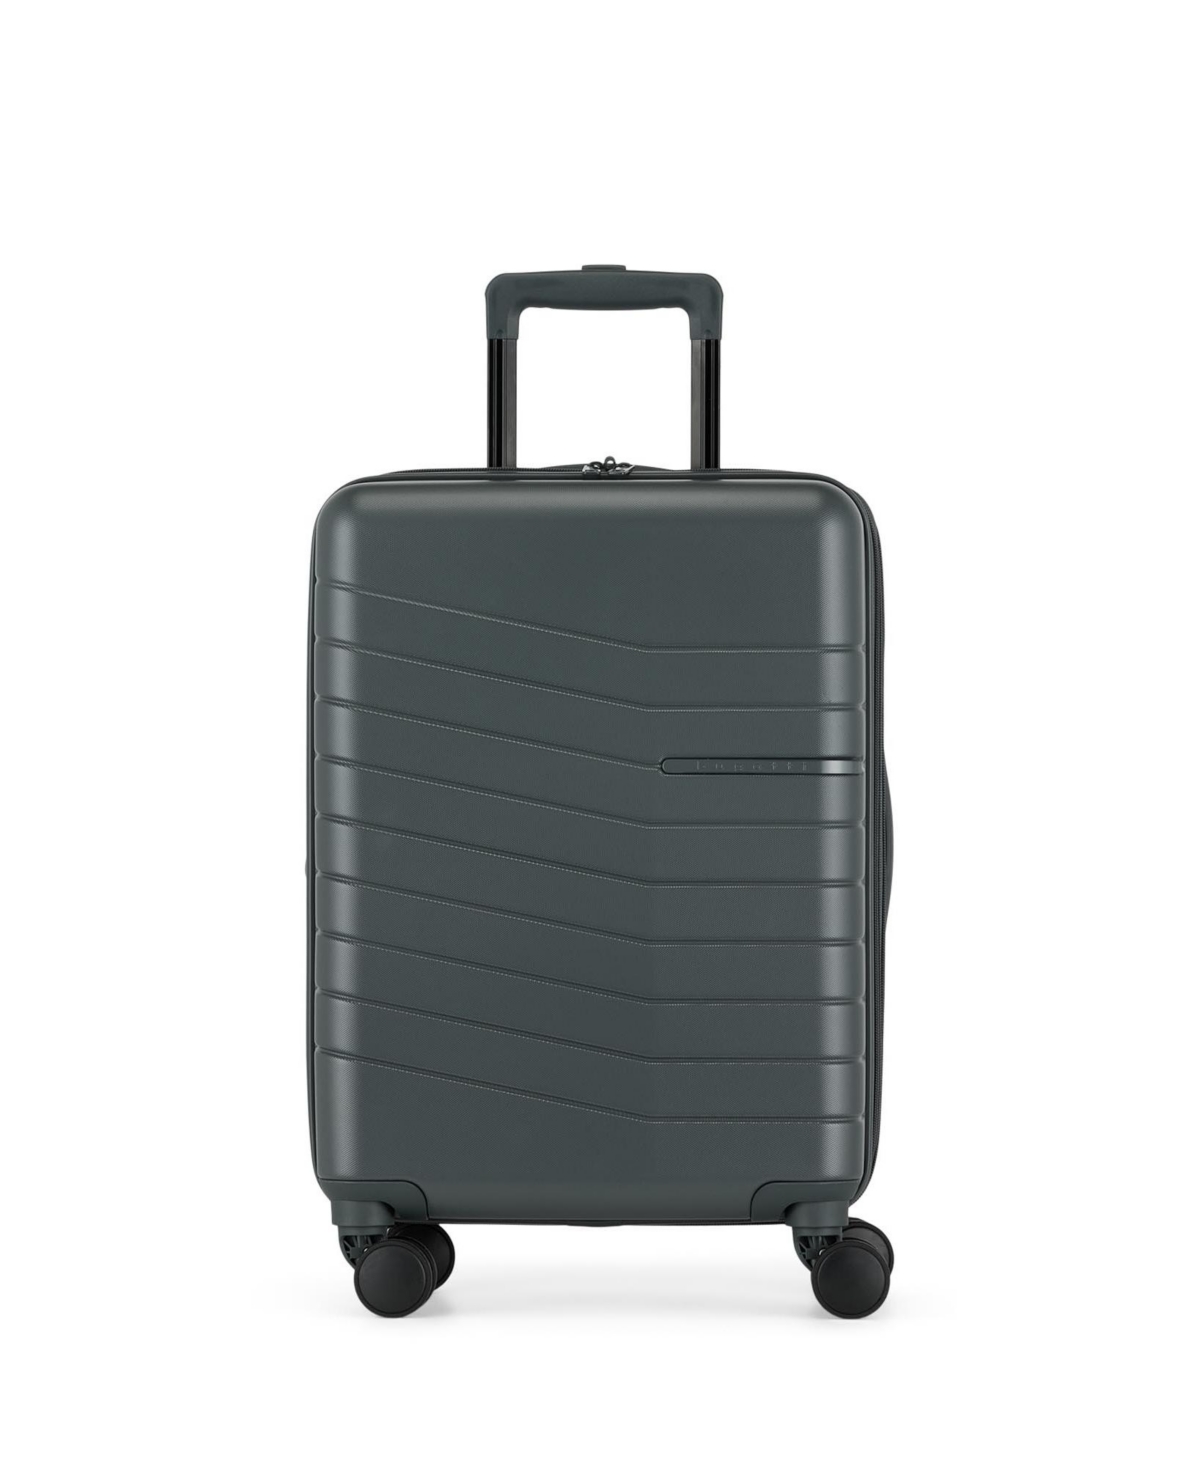 Munich Carry-on Luggage - Pewter Green